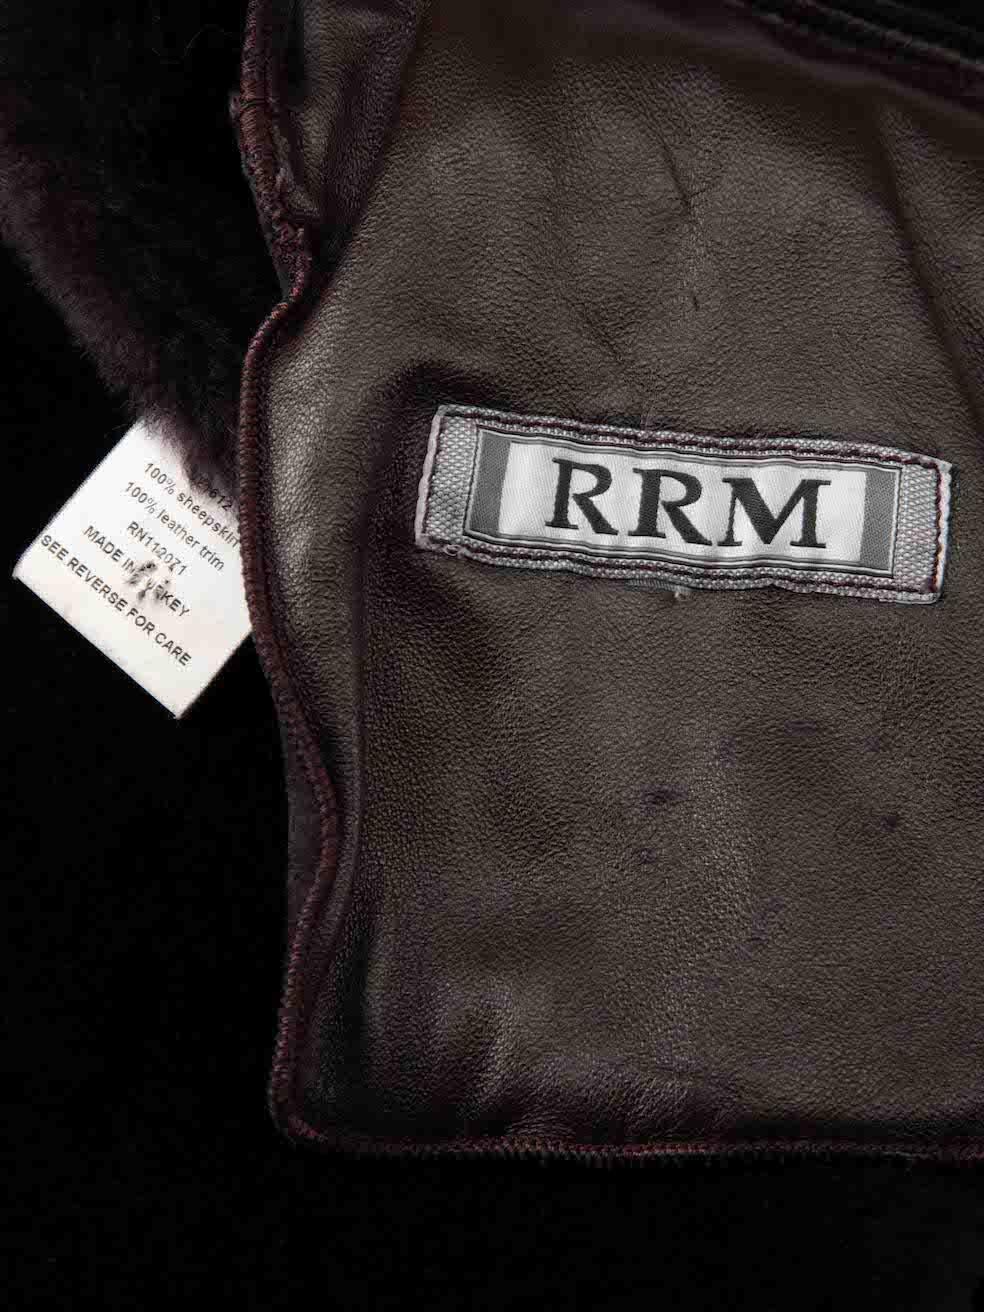 RRM Burgundy Suede Shearling Lined Coat Size M For Sale 2